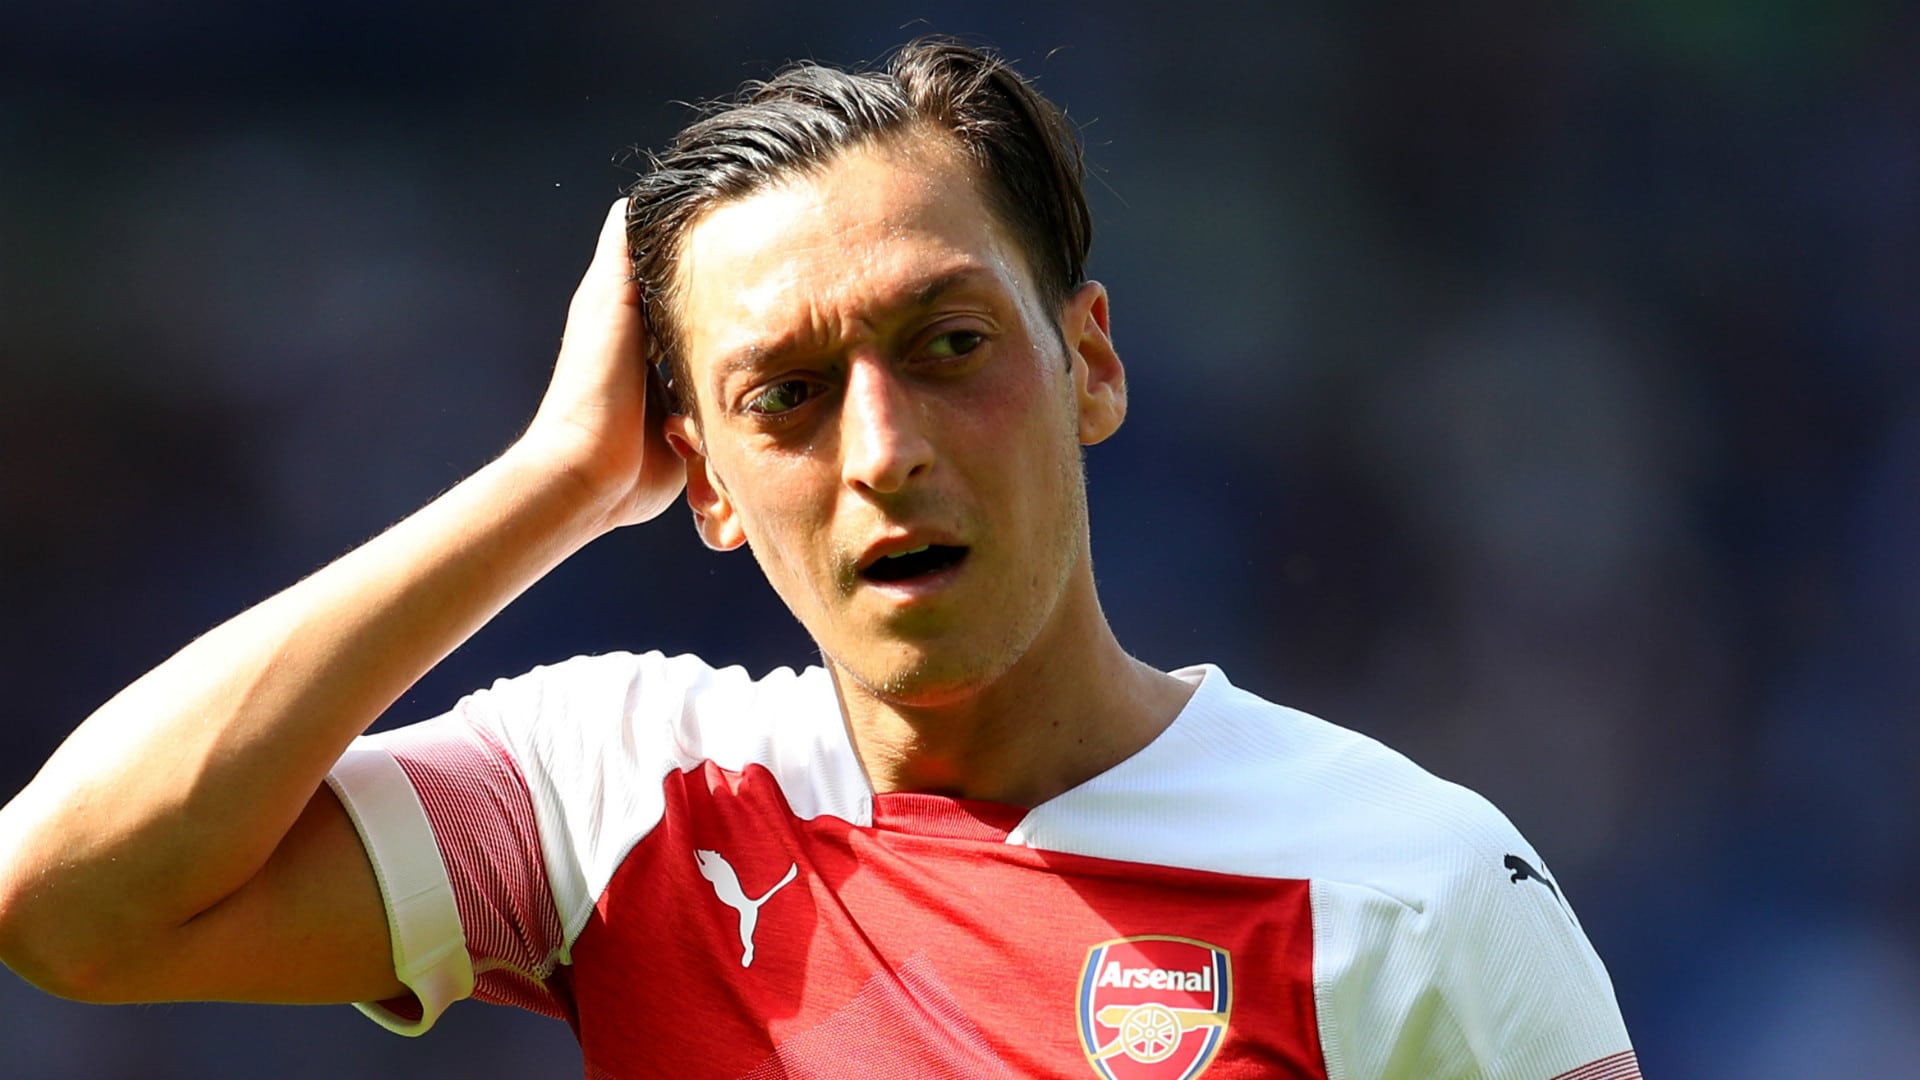 Mesut Ozil Bio, Height, Age, Family, Wife, Net Worth, Facts - Super